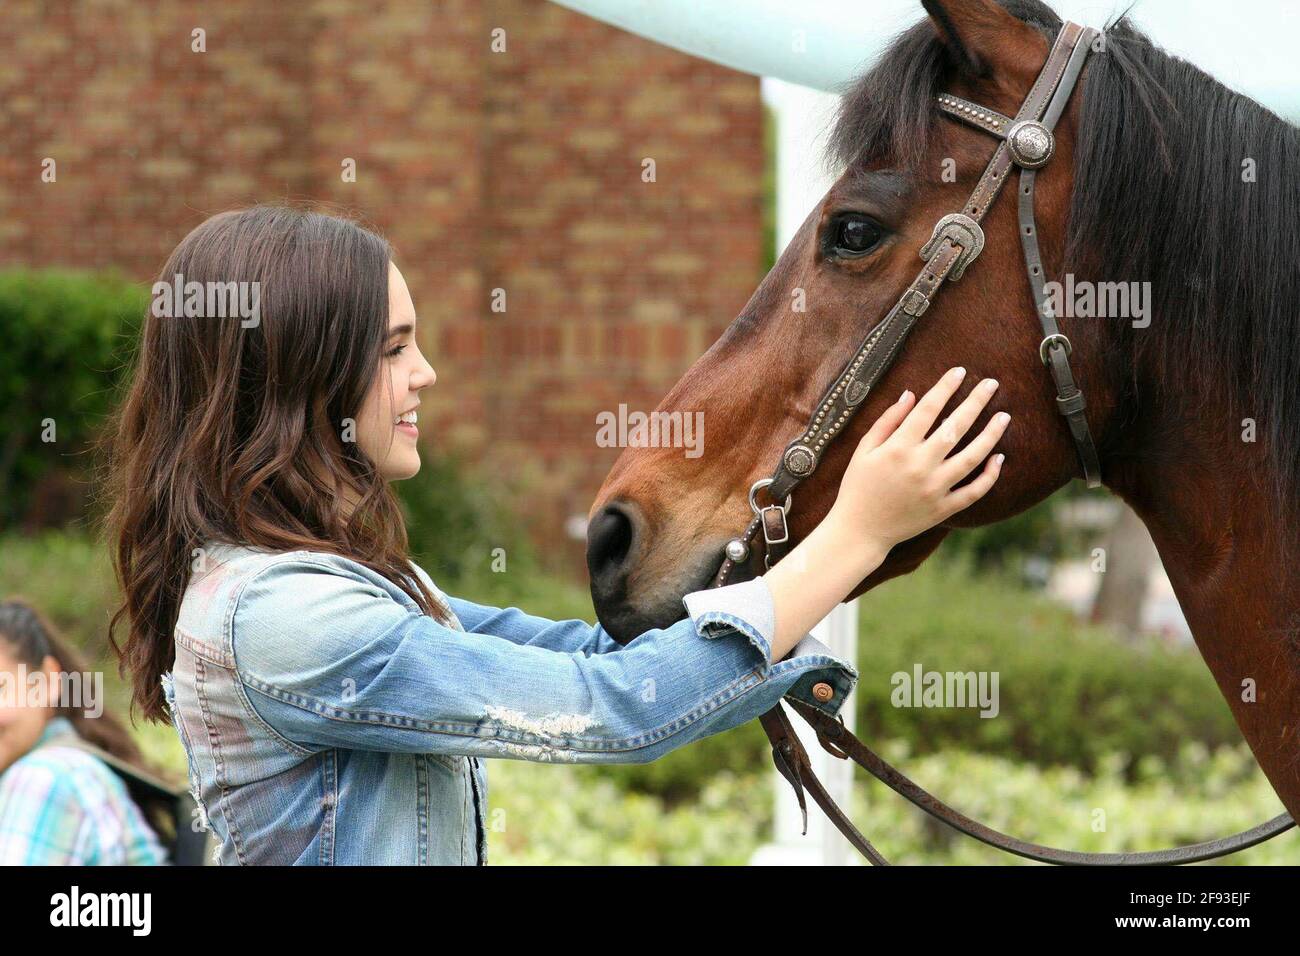 BAILEE MADISON in A COWGIRL'S STORY (2017), directed by TIMOTHY ARMSTRONG. Credit: RODEO FILMS / Album Stock Photo